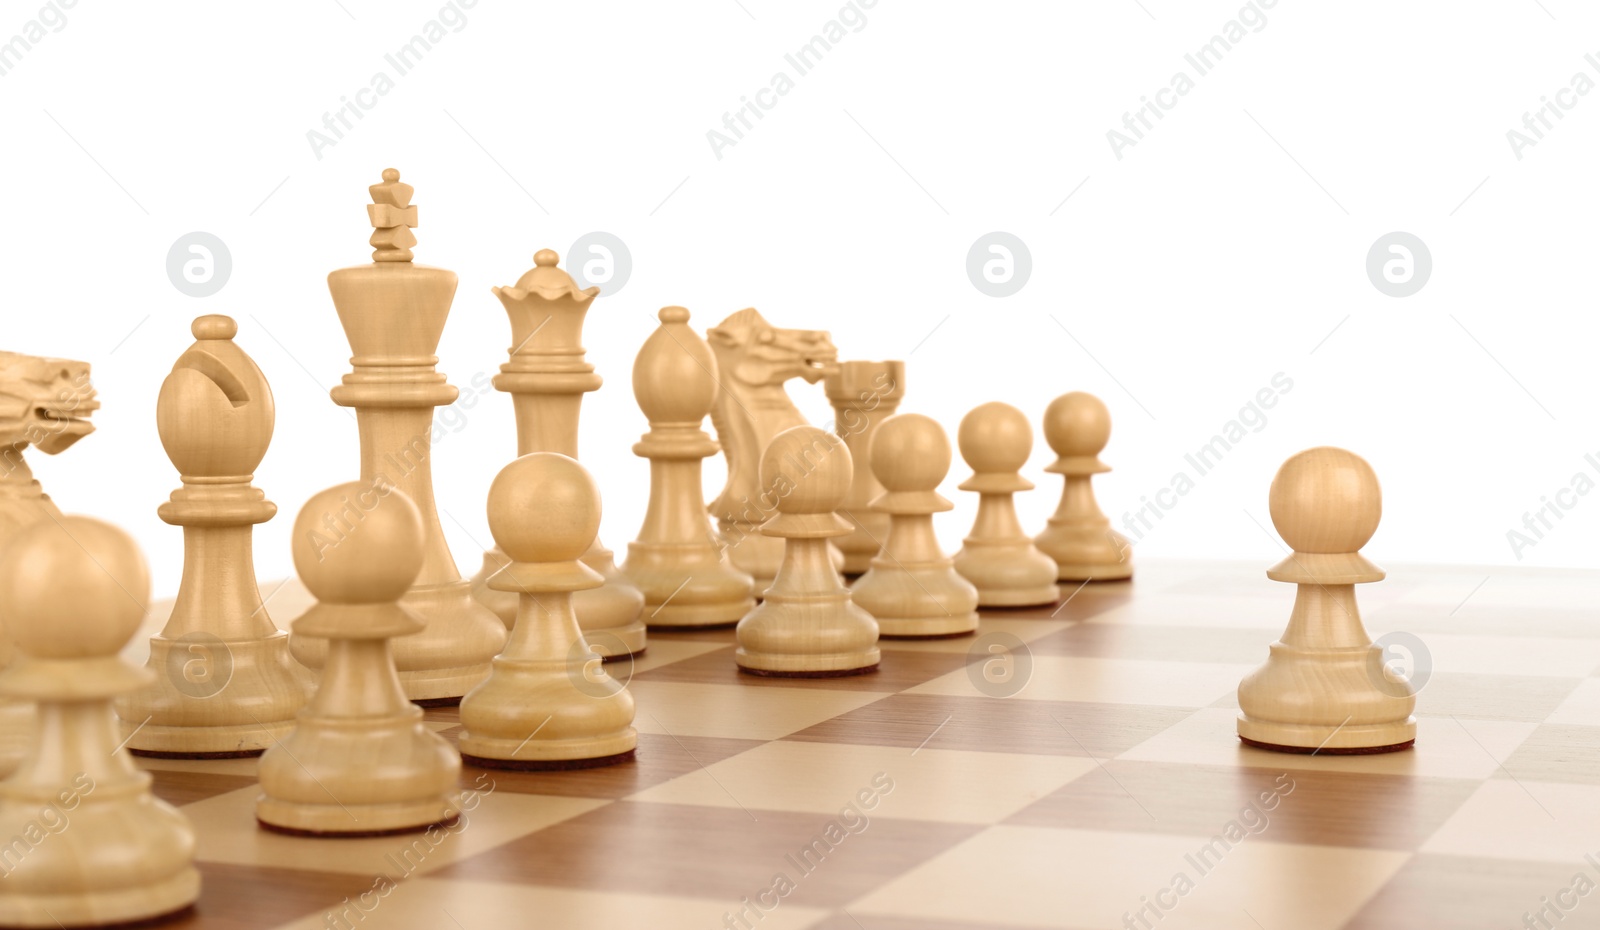 Photo of Pawn in front of other chess pieces on wooden board against white background